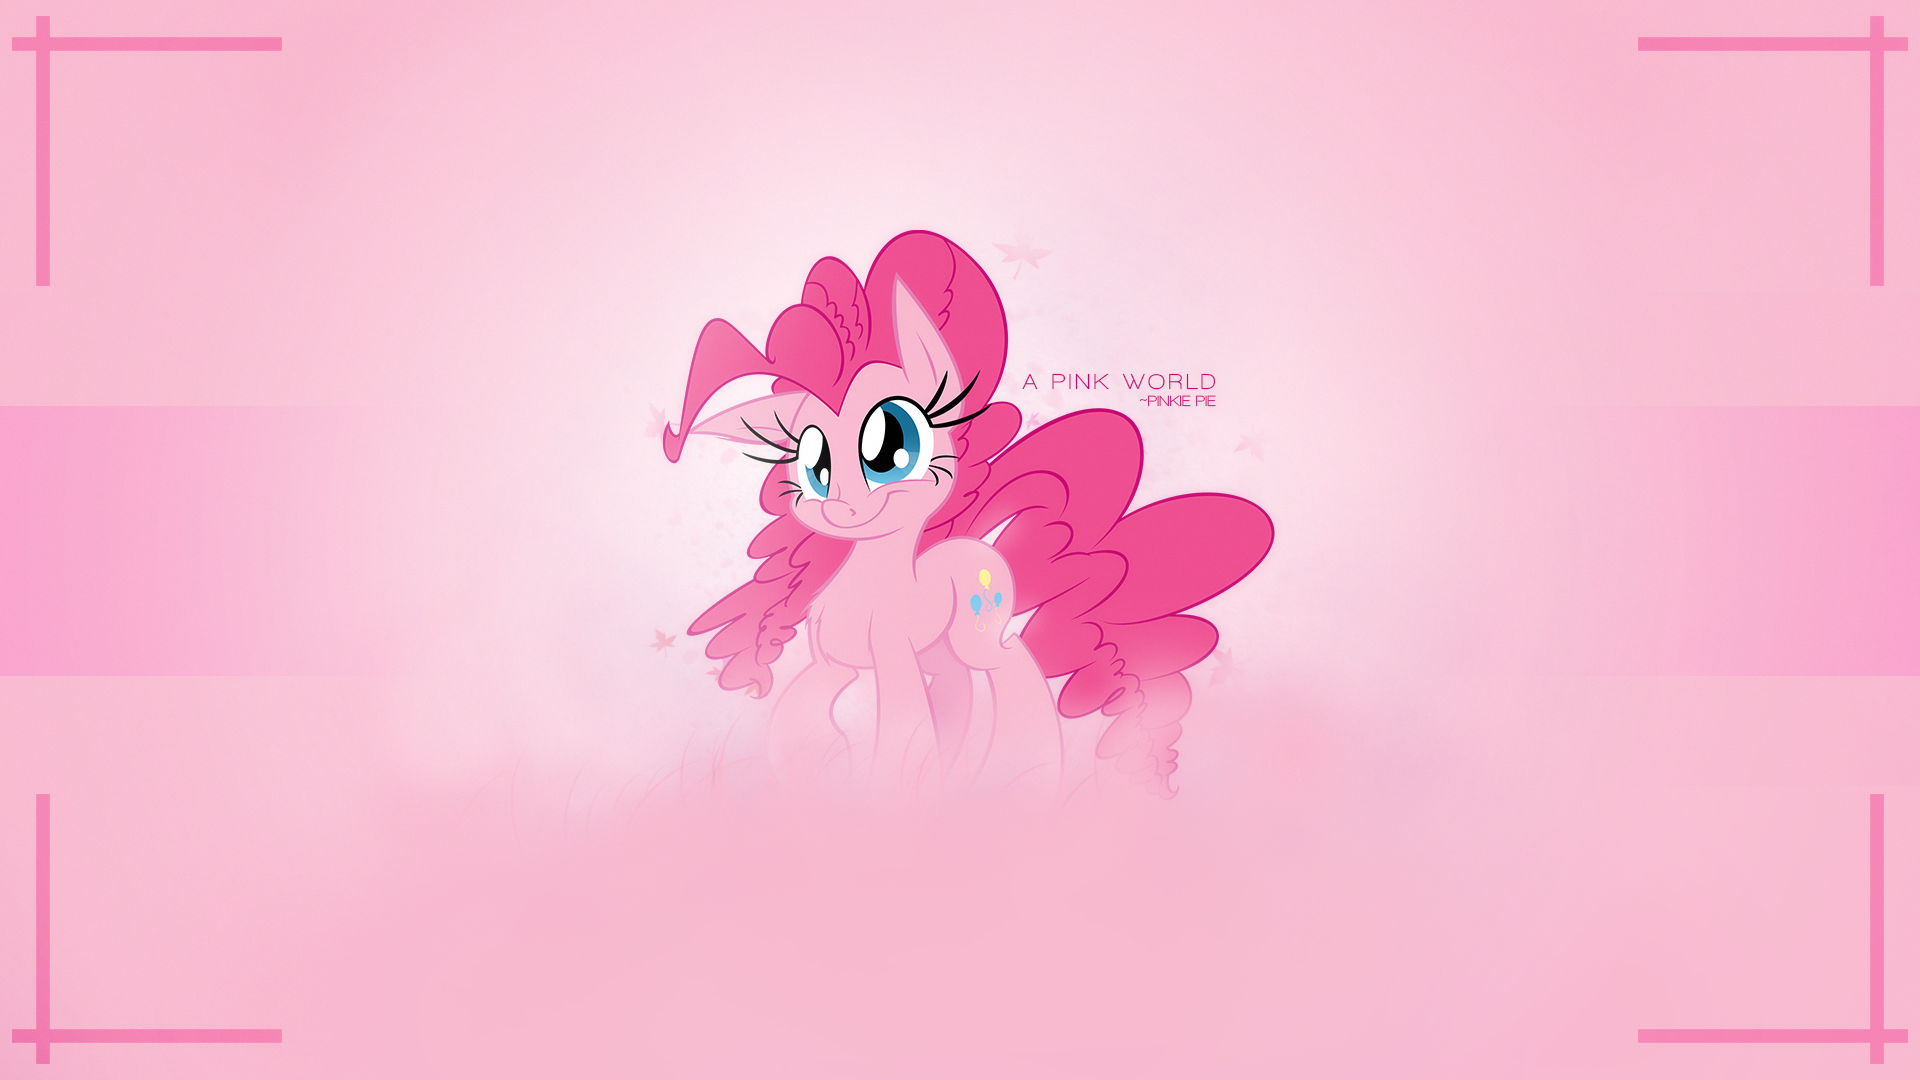 Wallpaper ~ A Pink World. by darth-franny, Mackaged and PhantomBadger